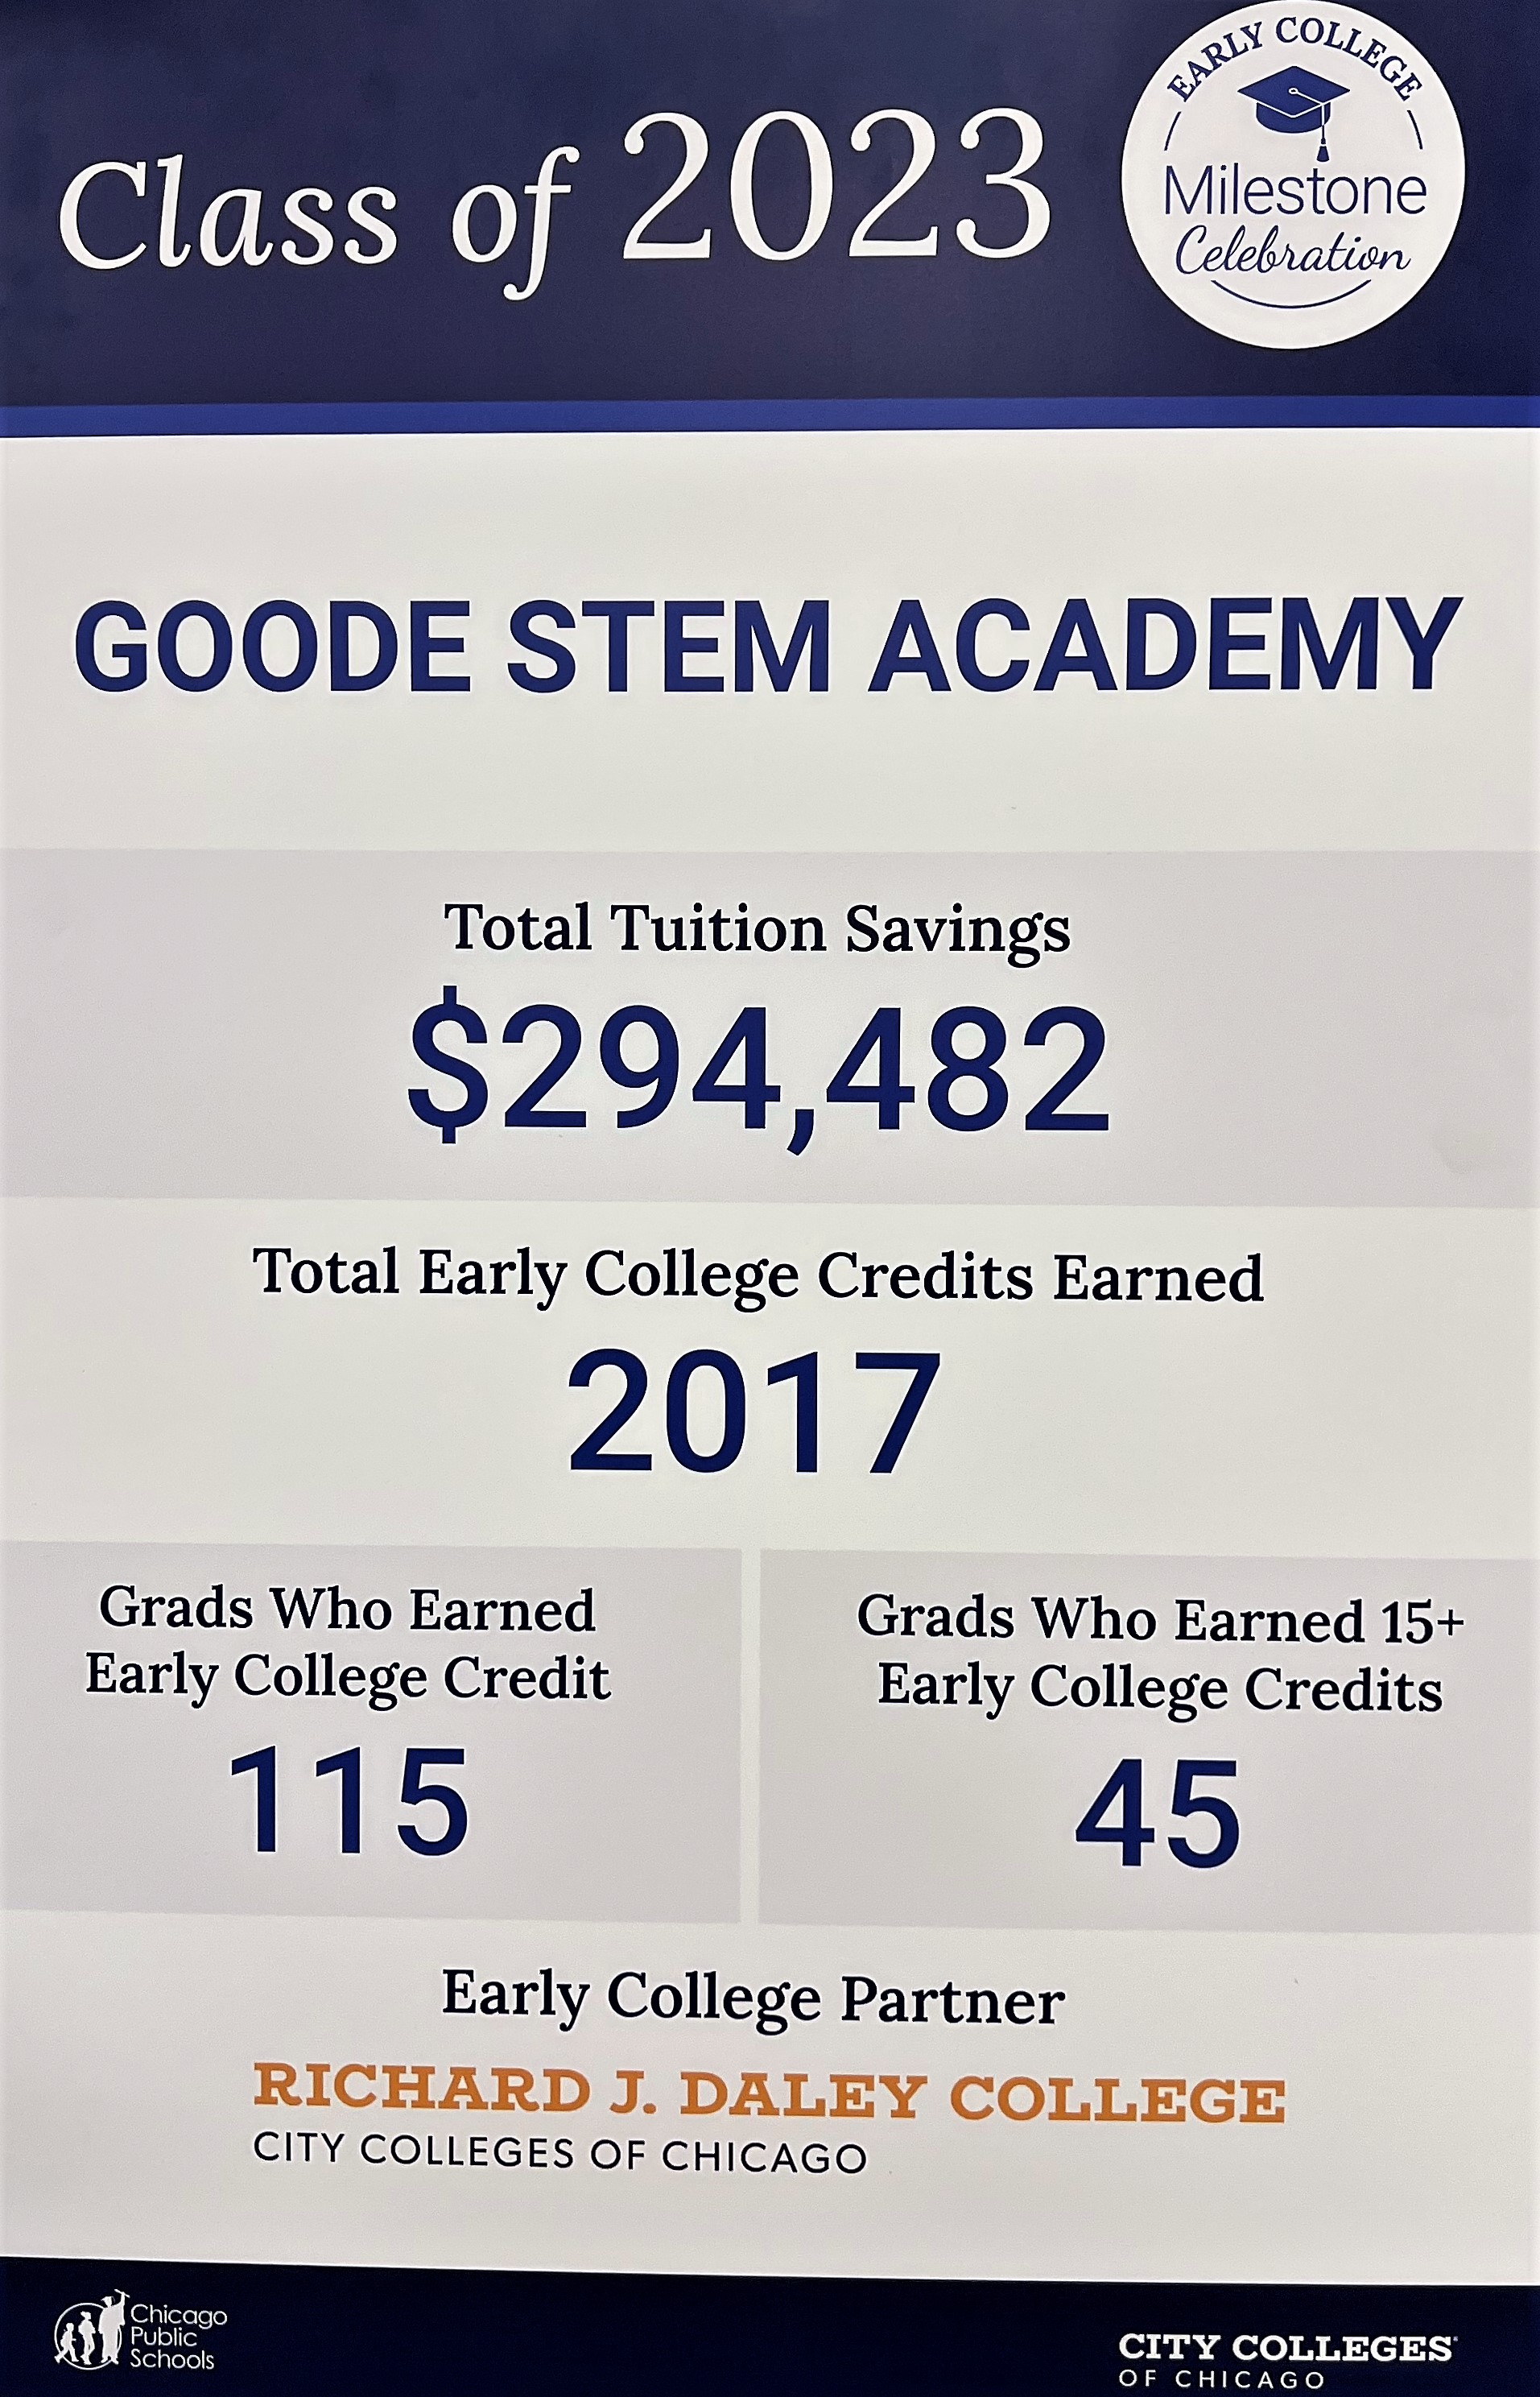 Early College Accomplishments for our Class of 2023